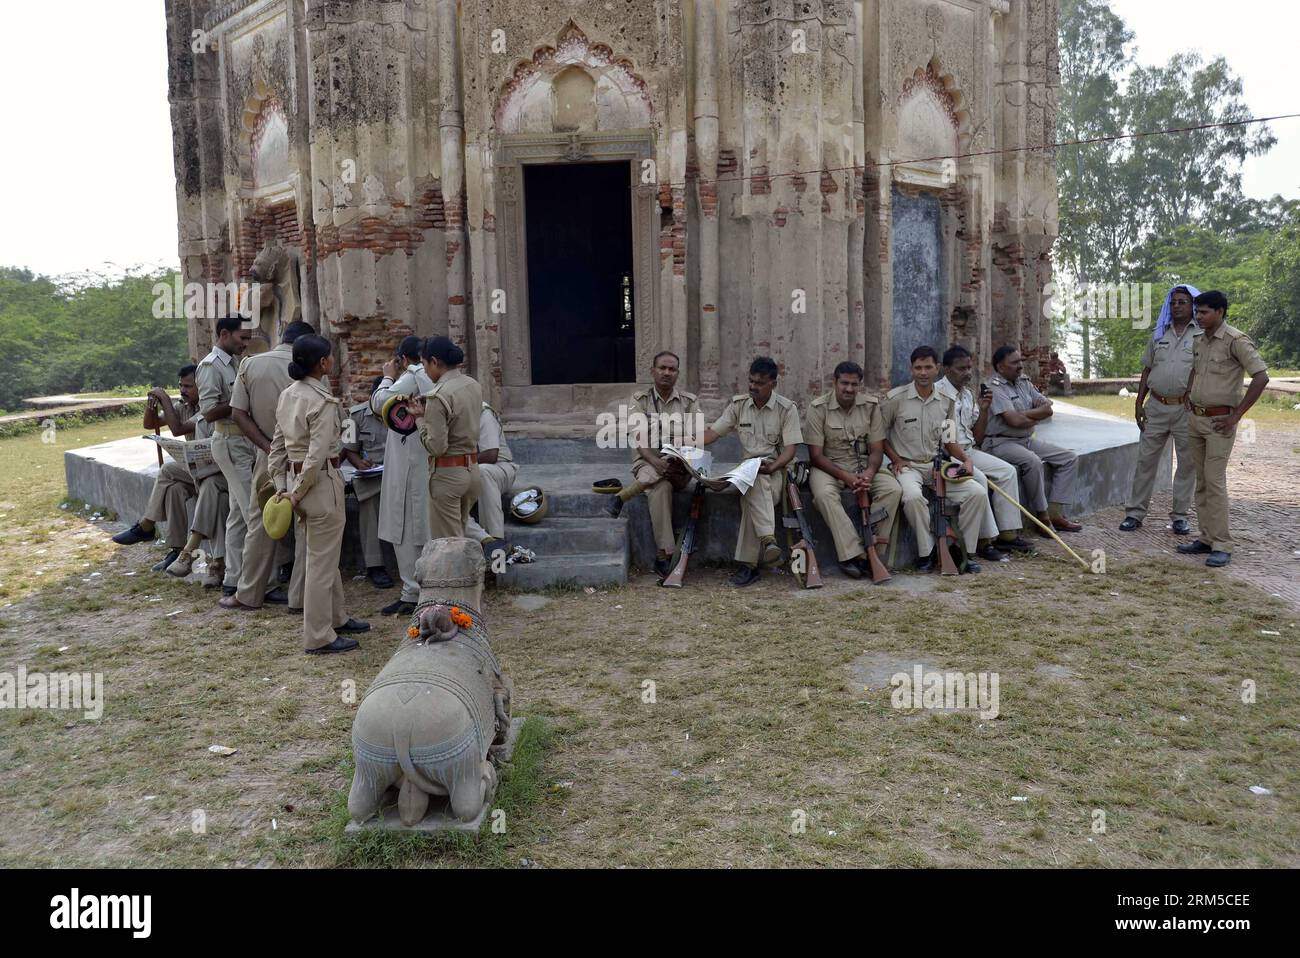 Bildnummer: 60623688  Datum: 21.10.2013  Copyright: imago/Xinhua Policemen work at the Raja Rao Ram Bux Singh s fort in Uttar Pradesh s Unnao district, India, Oct. 21, 2013. After a priest said he saw 1,000 tons of gold buried beneath a fort in Uttar Pradesh s Unnao district of northern India, a frenzy gold rush started in the area with hundreds of thousands of thronging to the spots hoping to become rich overnight. (Xinhua) INDIA-UNNAO-GOLD RUSH PUBLICATIONxNOTxINxCHN Gesellschaft x2x xkg 2013 quer premiumd o0 Polizei     60623688 Date 21 10 2013 Copyright Imago XINHUA Policemen Work AT The R Stock Photo